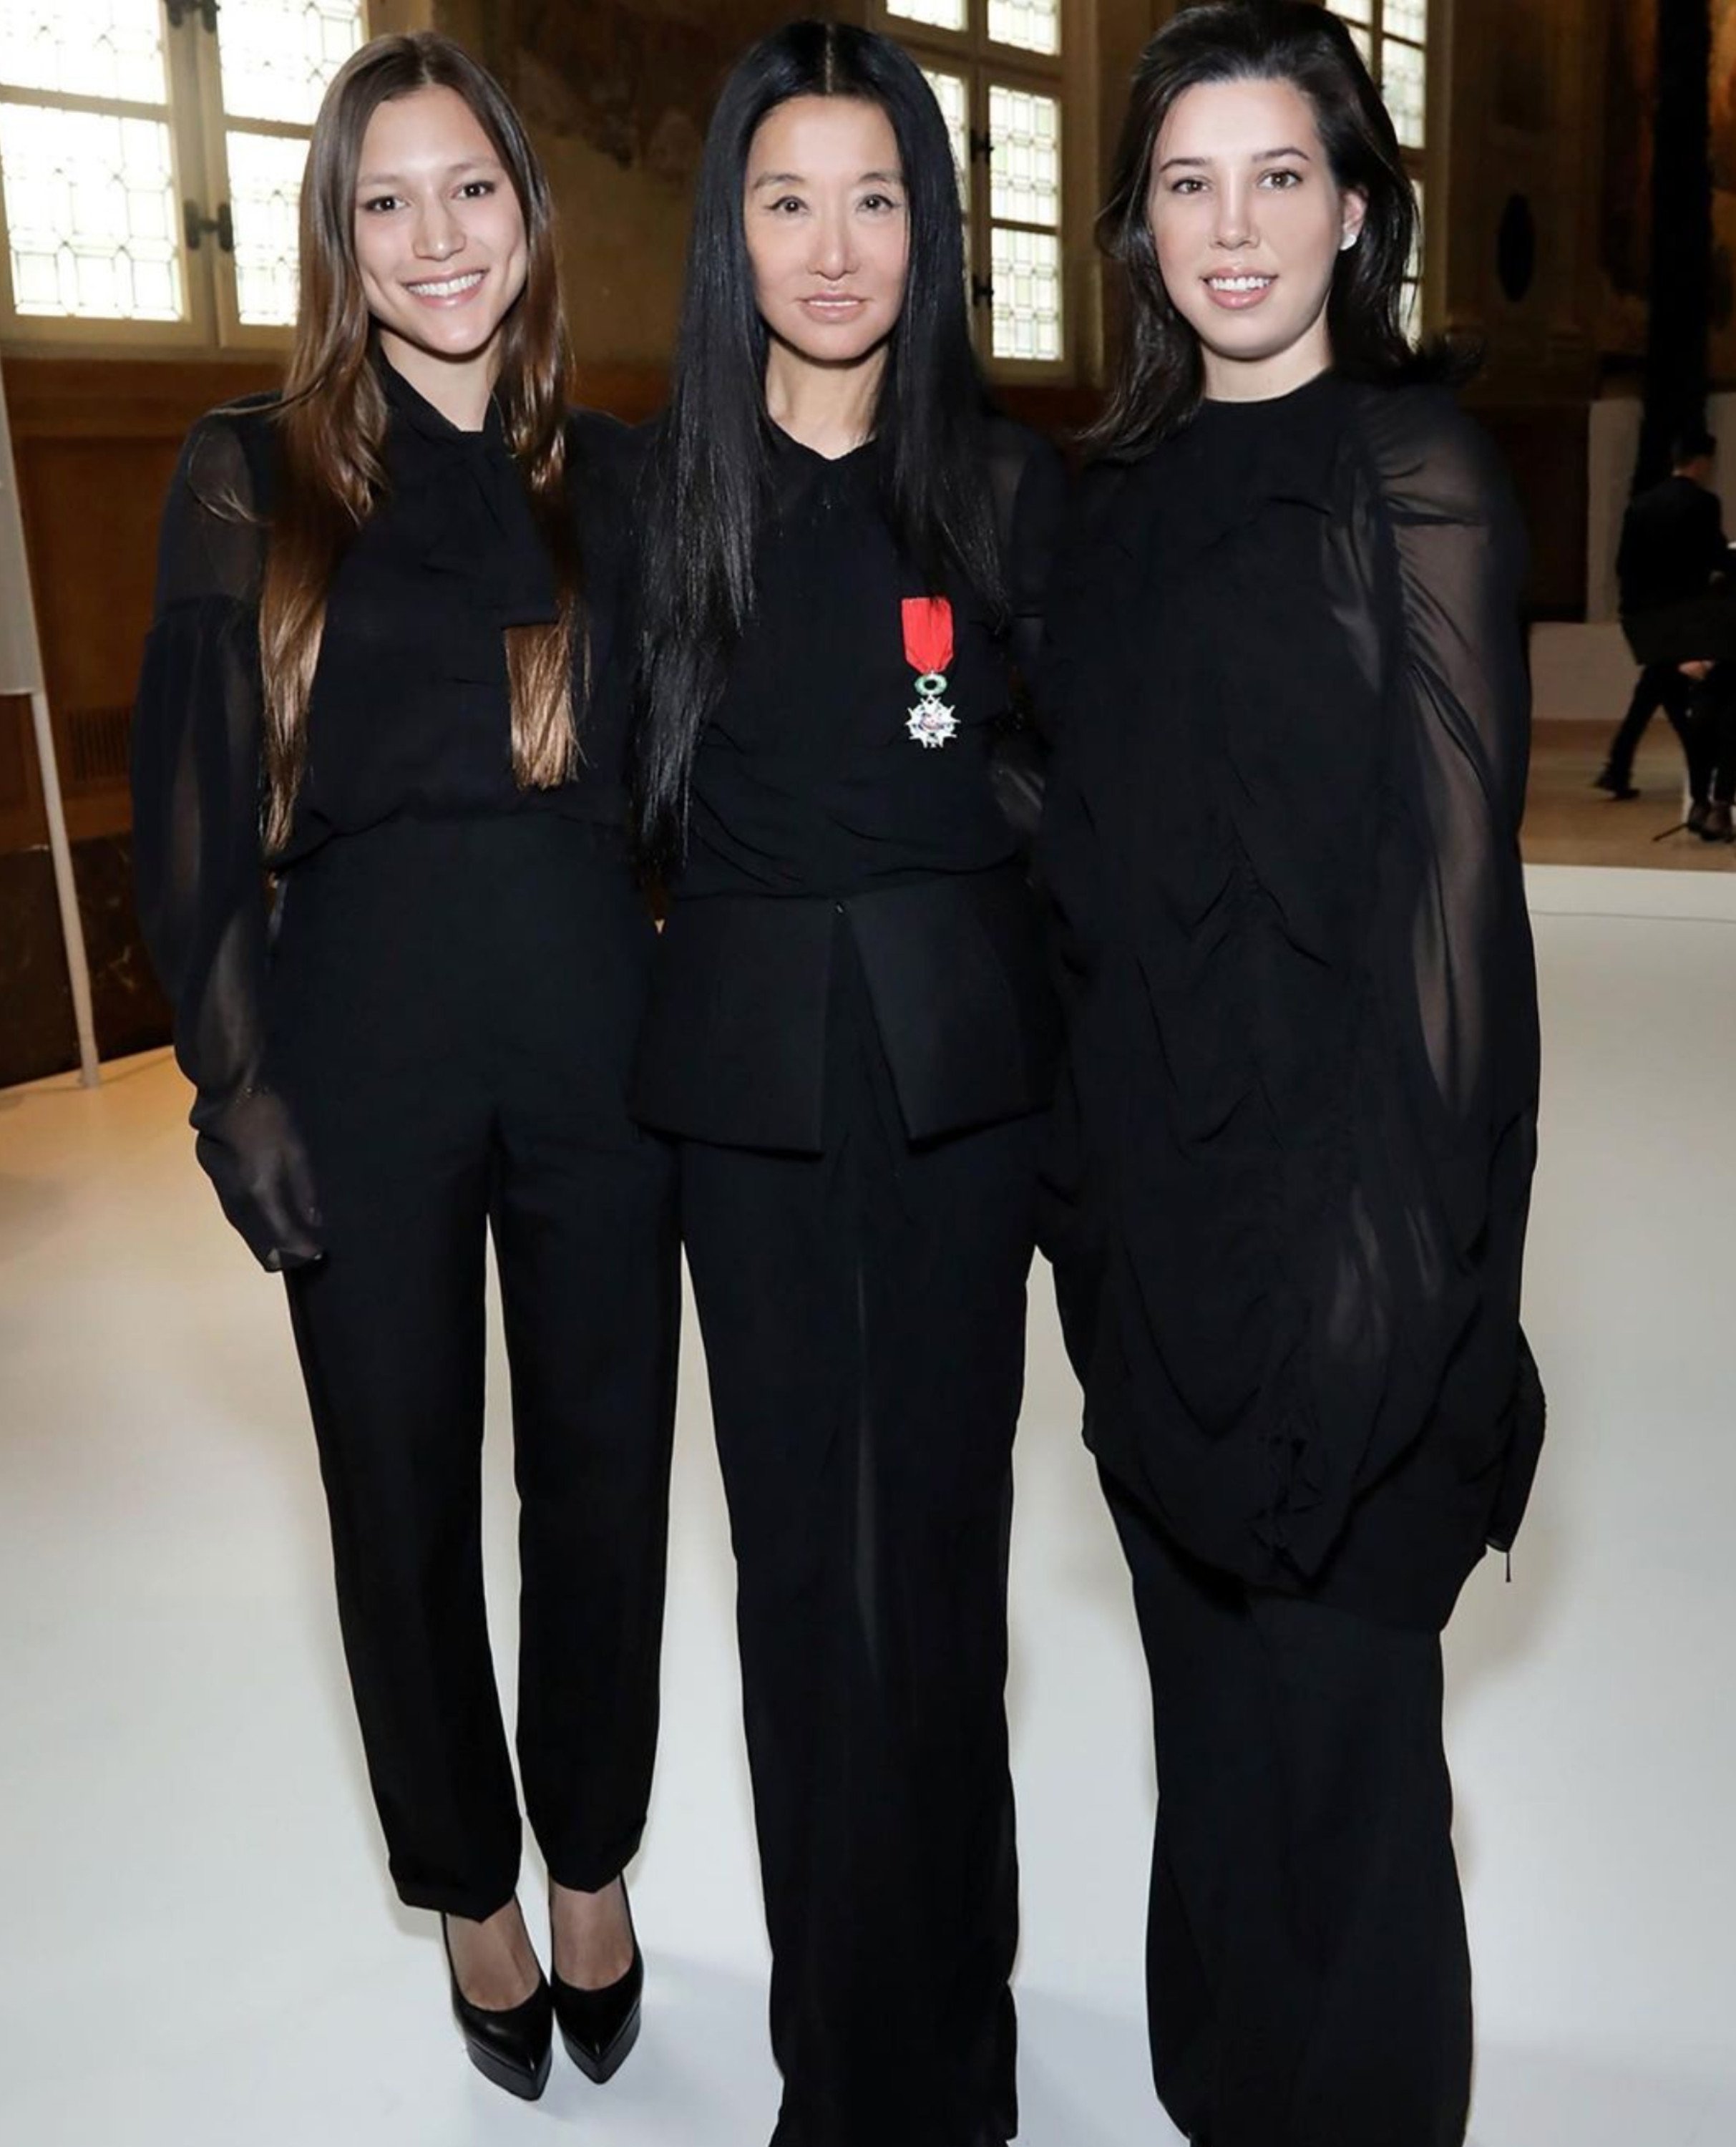 Vera Wang with her daughters Cecilia and Josephine Becker. Now in her 70s, the iconic designer looks so youthful that fans have commented that she and her daughters look like sisters. Photo: @verawang/Instagram